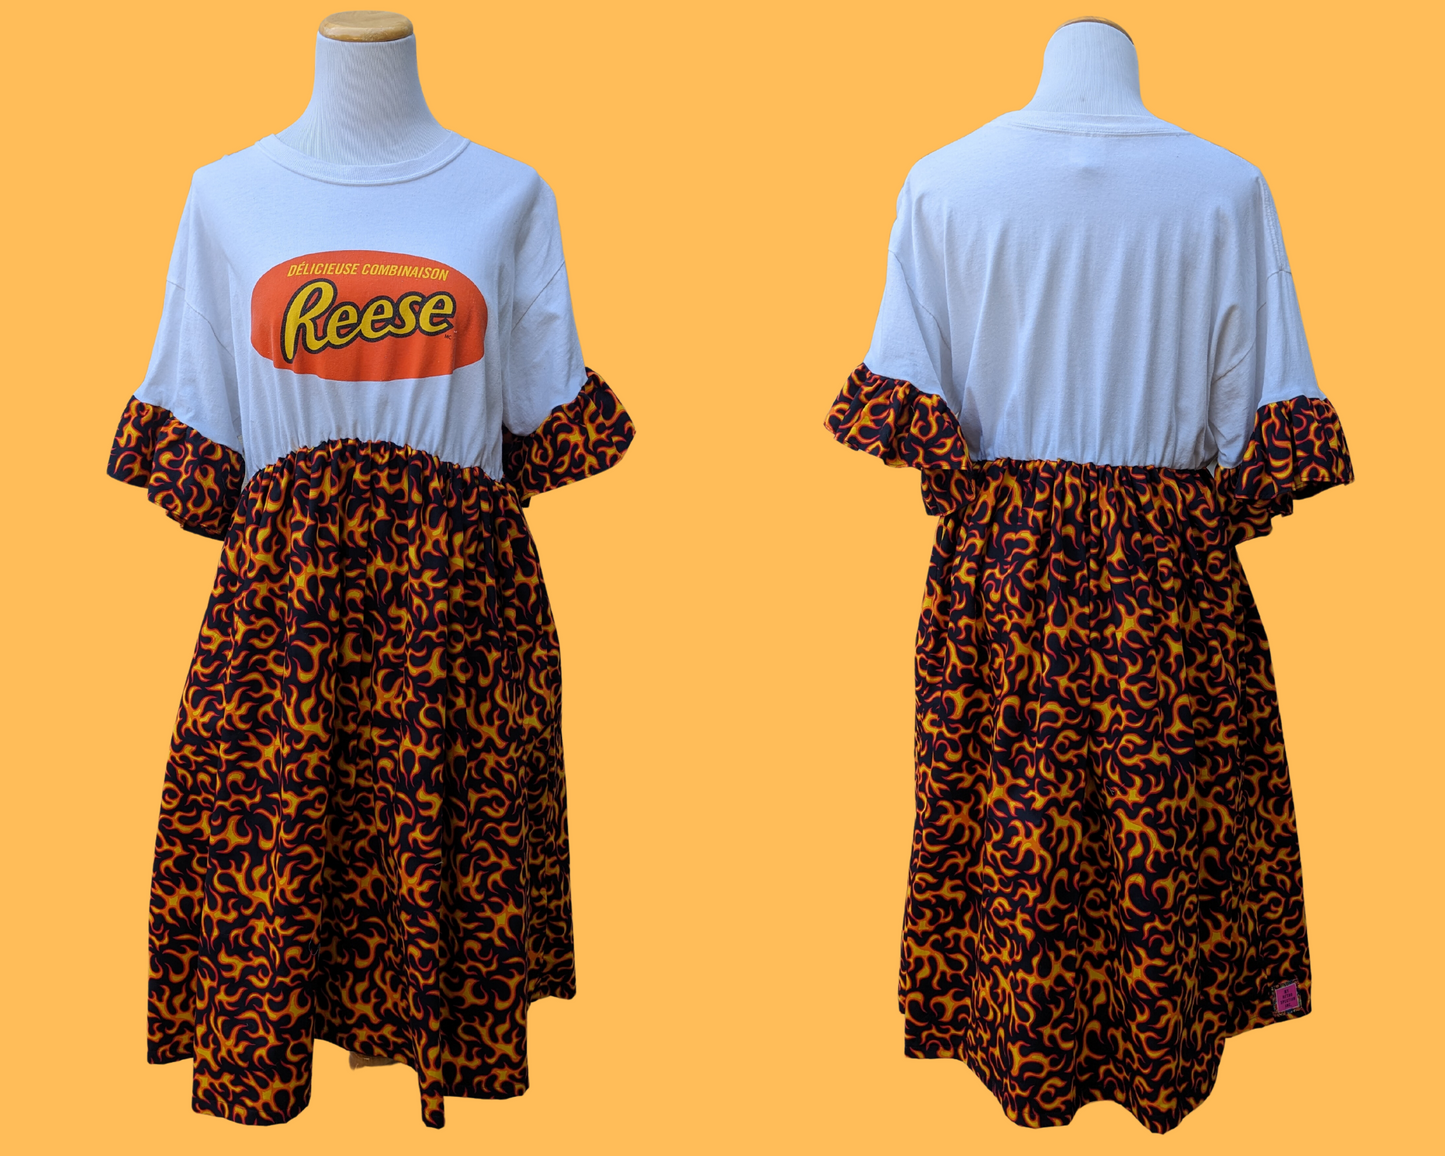 Handmade, Upcycled Reese T-Shirt Dress with Flames Patterned Fabric Size L